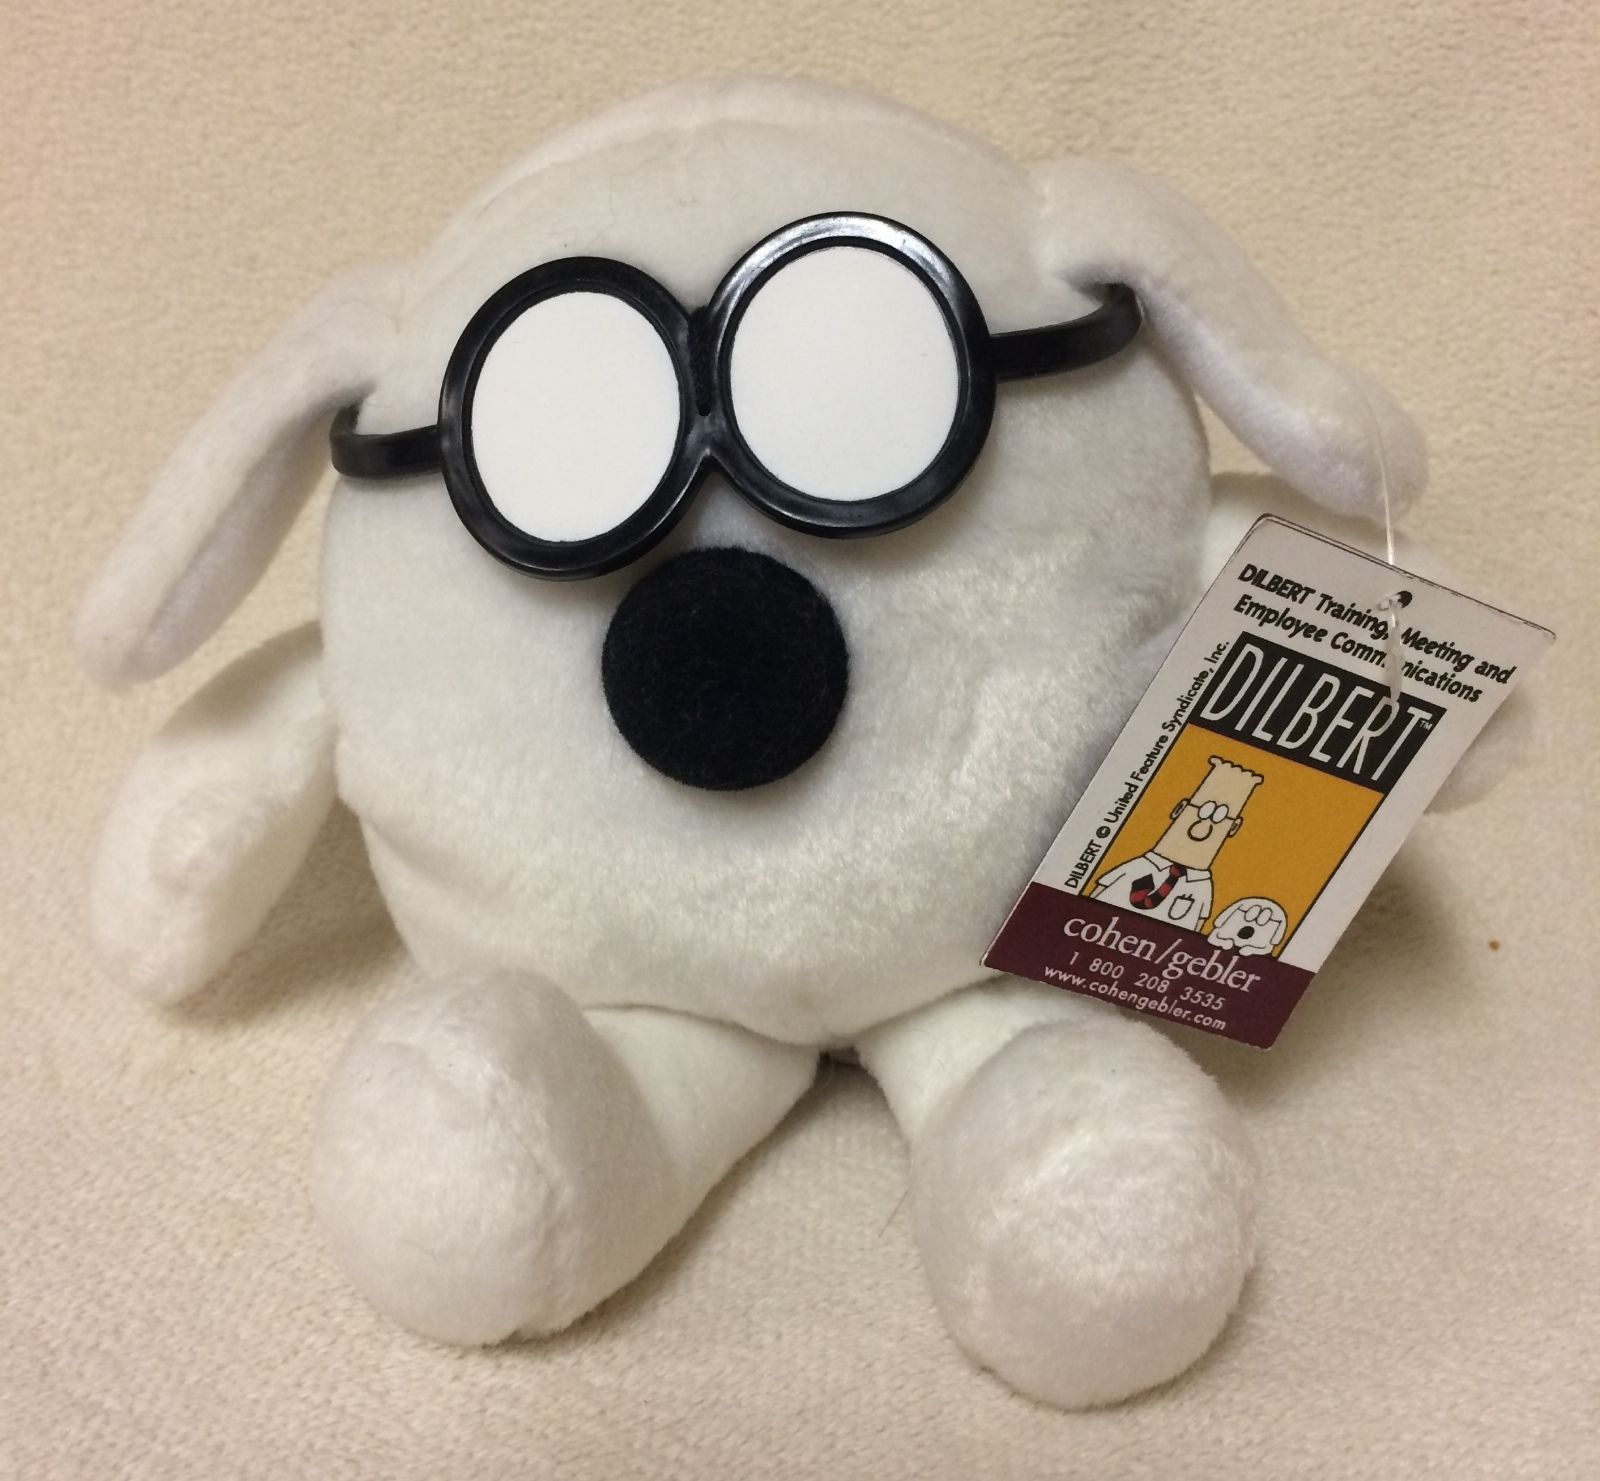 The Dilbert Characters Bossbert, Dogbert and Ratbert are plush dolls made by Gund.